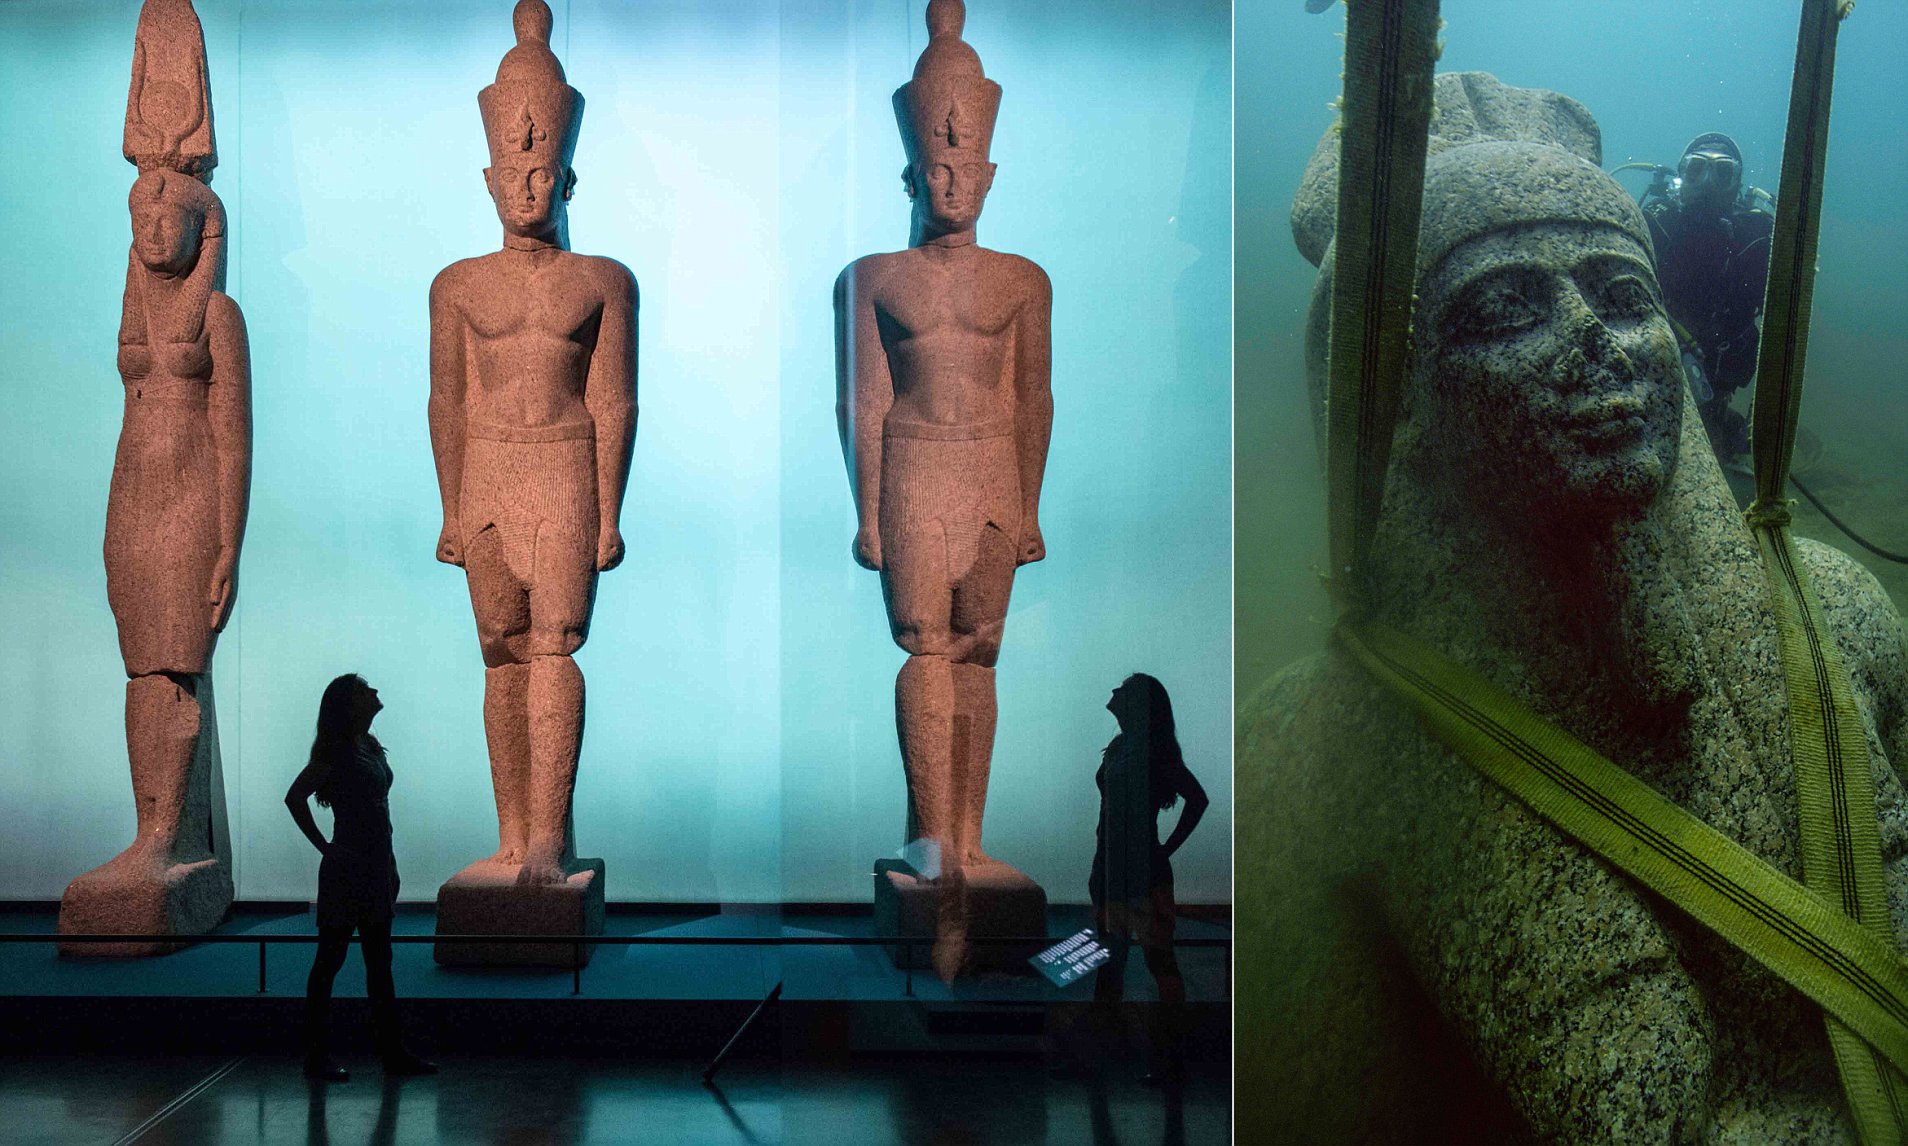 Exhibits of the exhibition "Secrets of Sunken Egypt" return home after a long tour